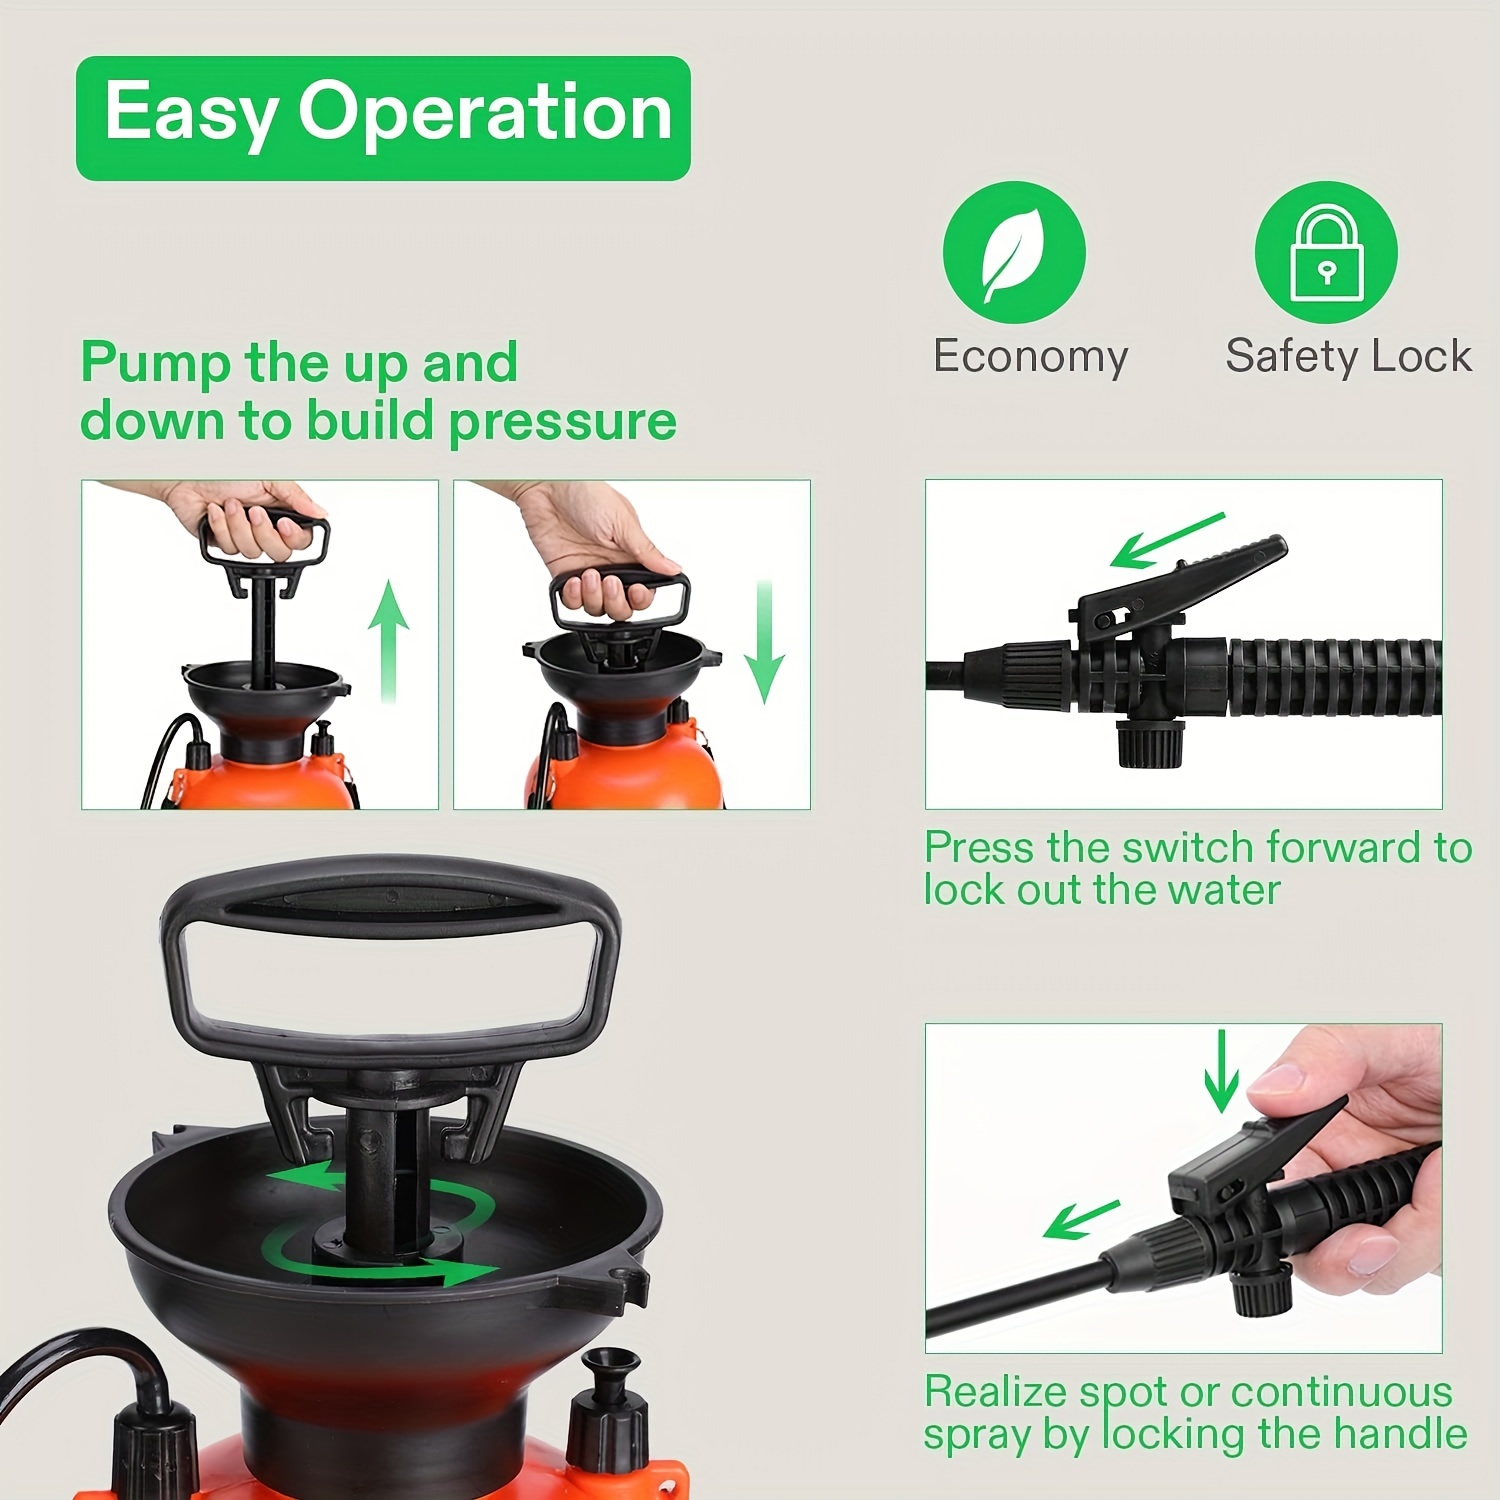 1 Gallon Sprayer Pump Pressure Lawn and Garden Portable Sprayer with  Safety, Special Handle and Adjustable Shoulder Strap